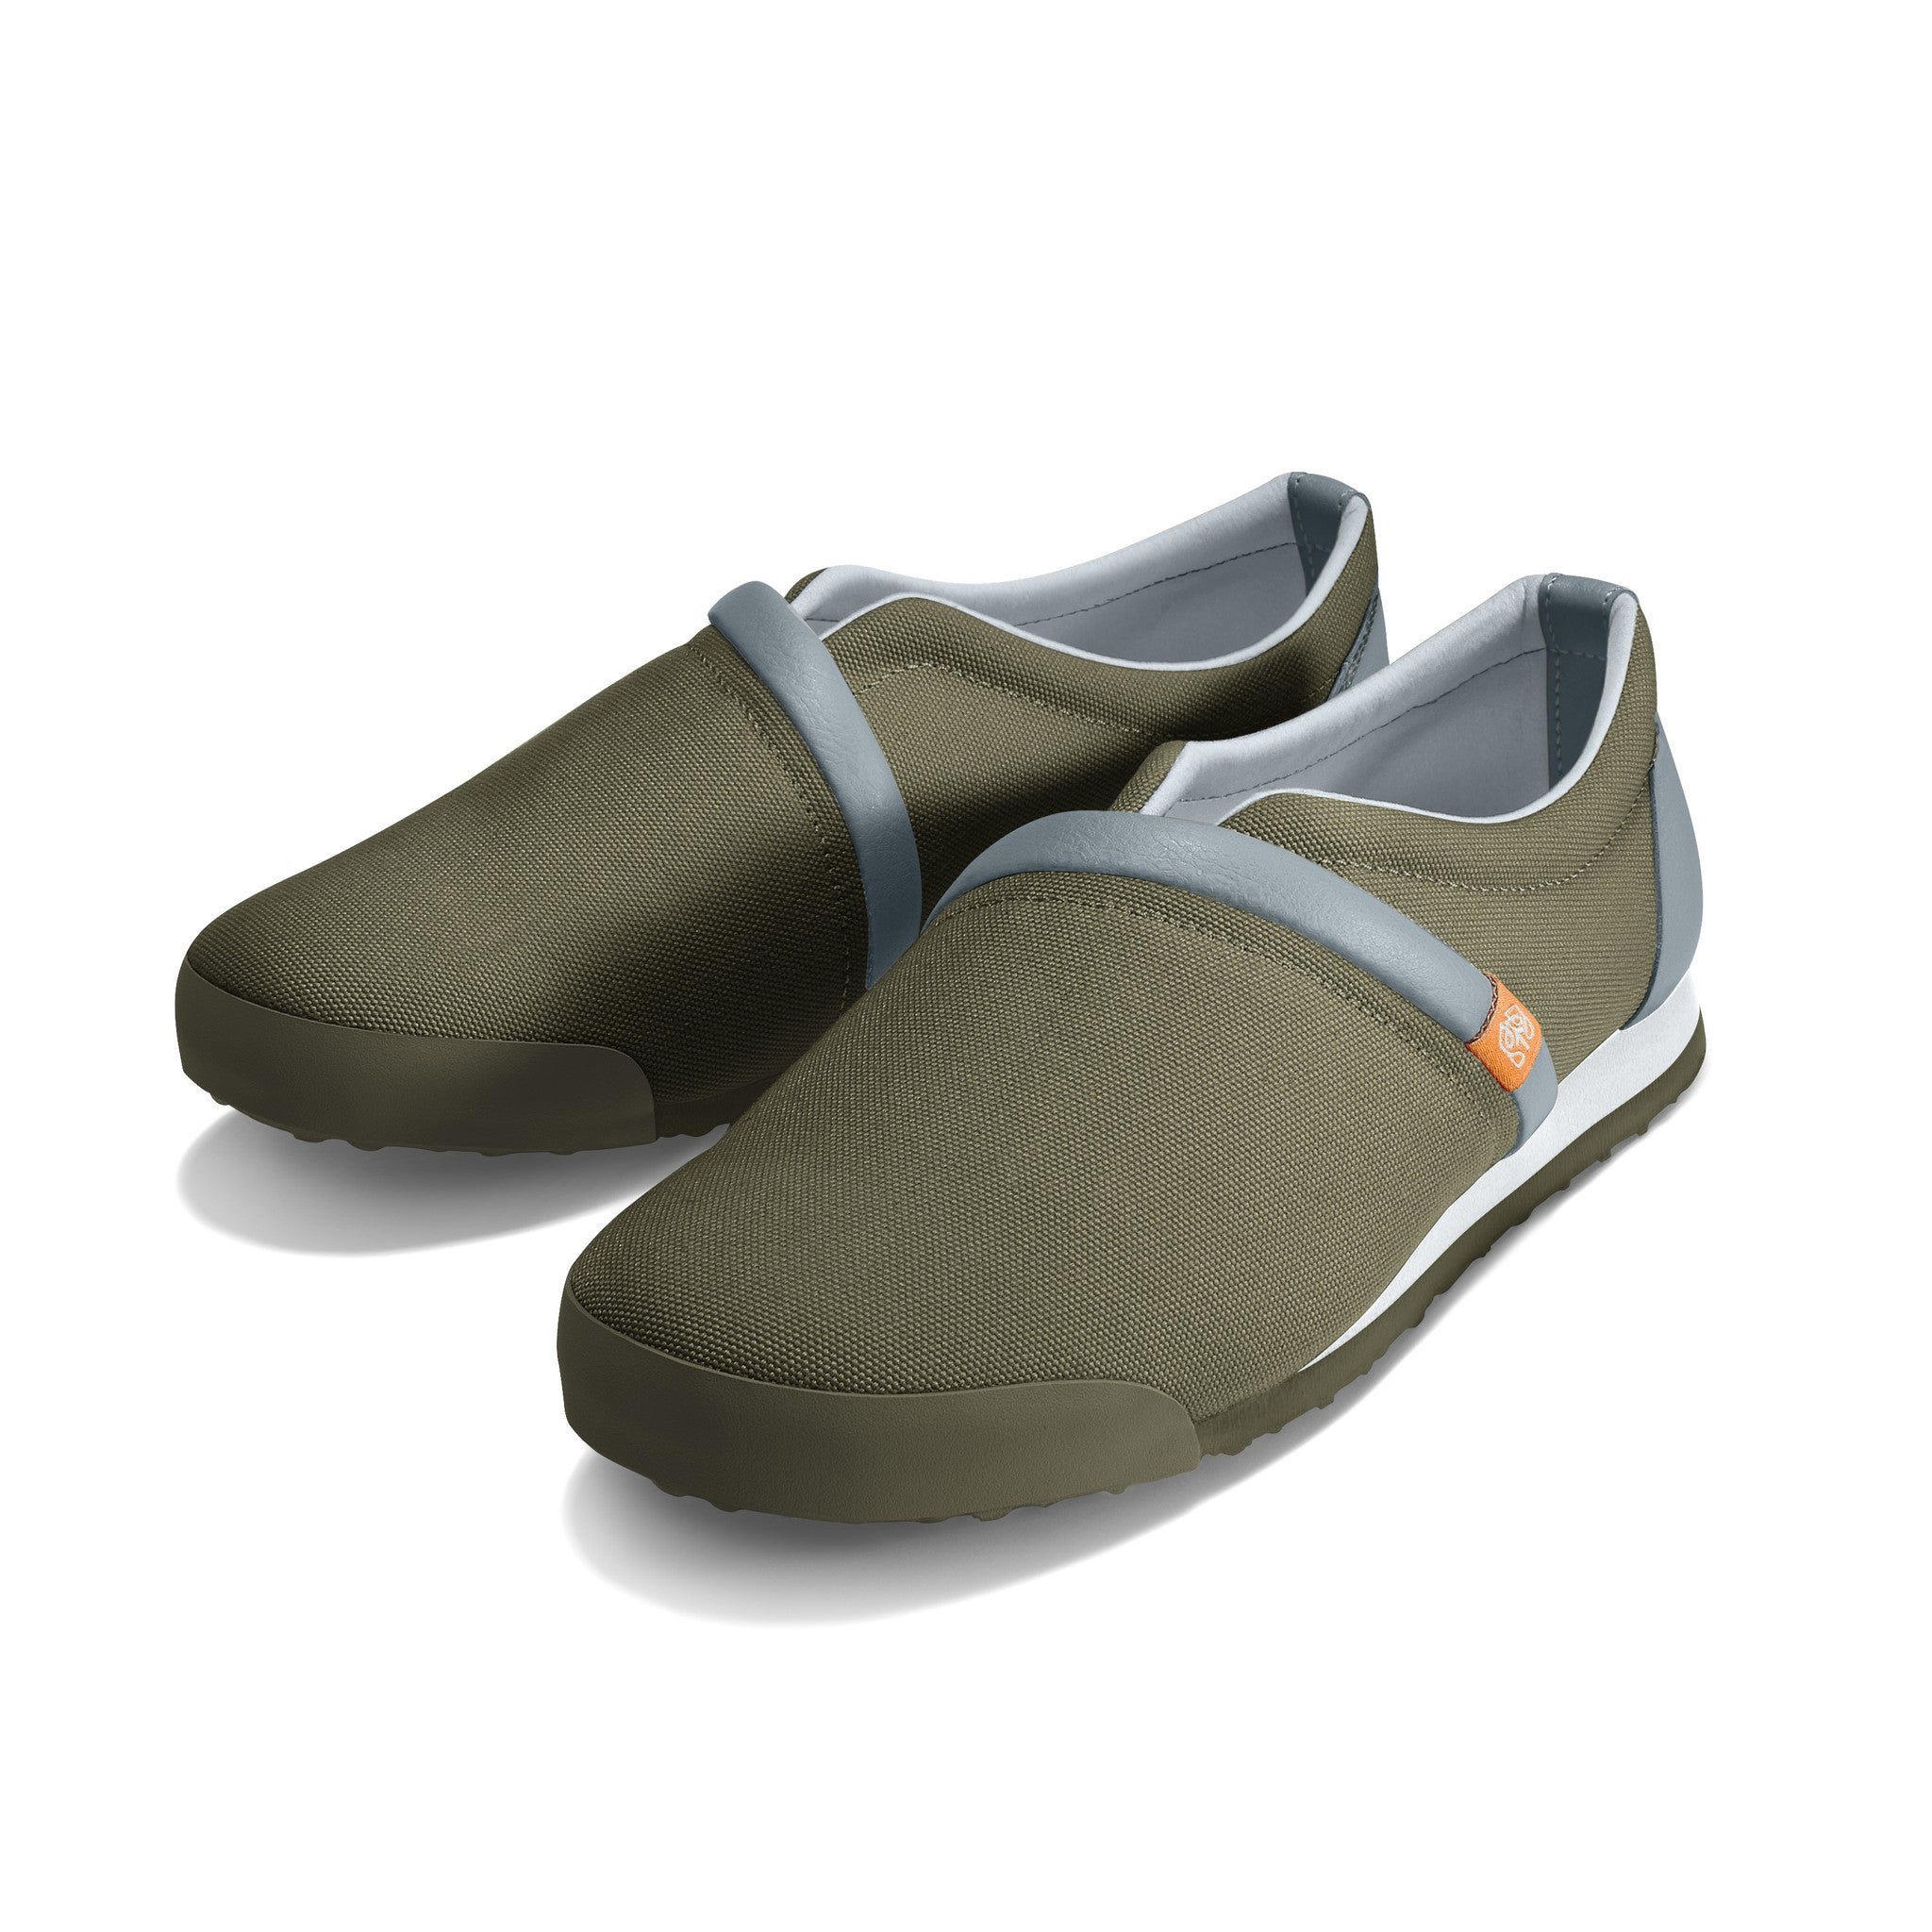 Military_Olive - Common Ground Footwear Shoes Left Perspective View